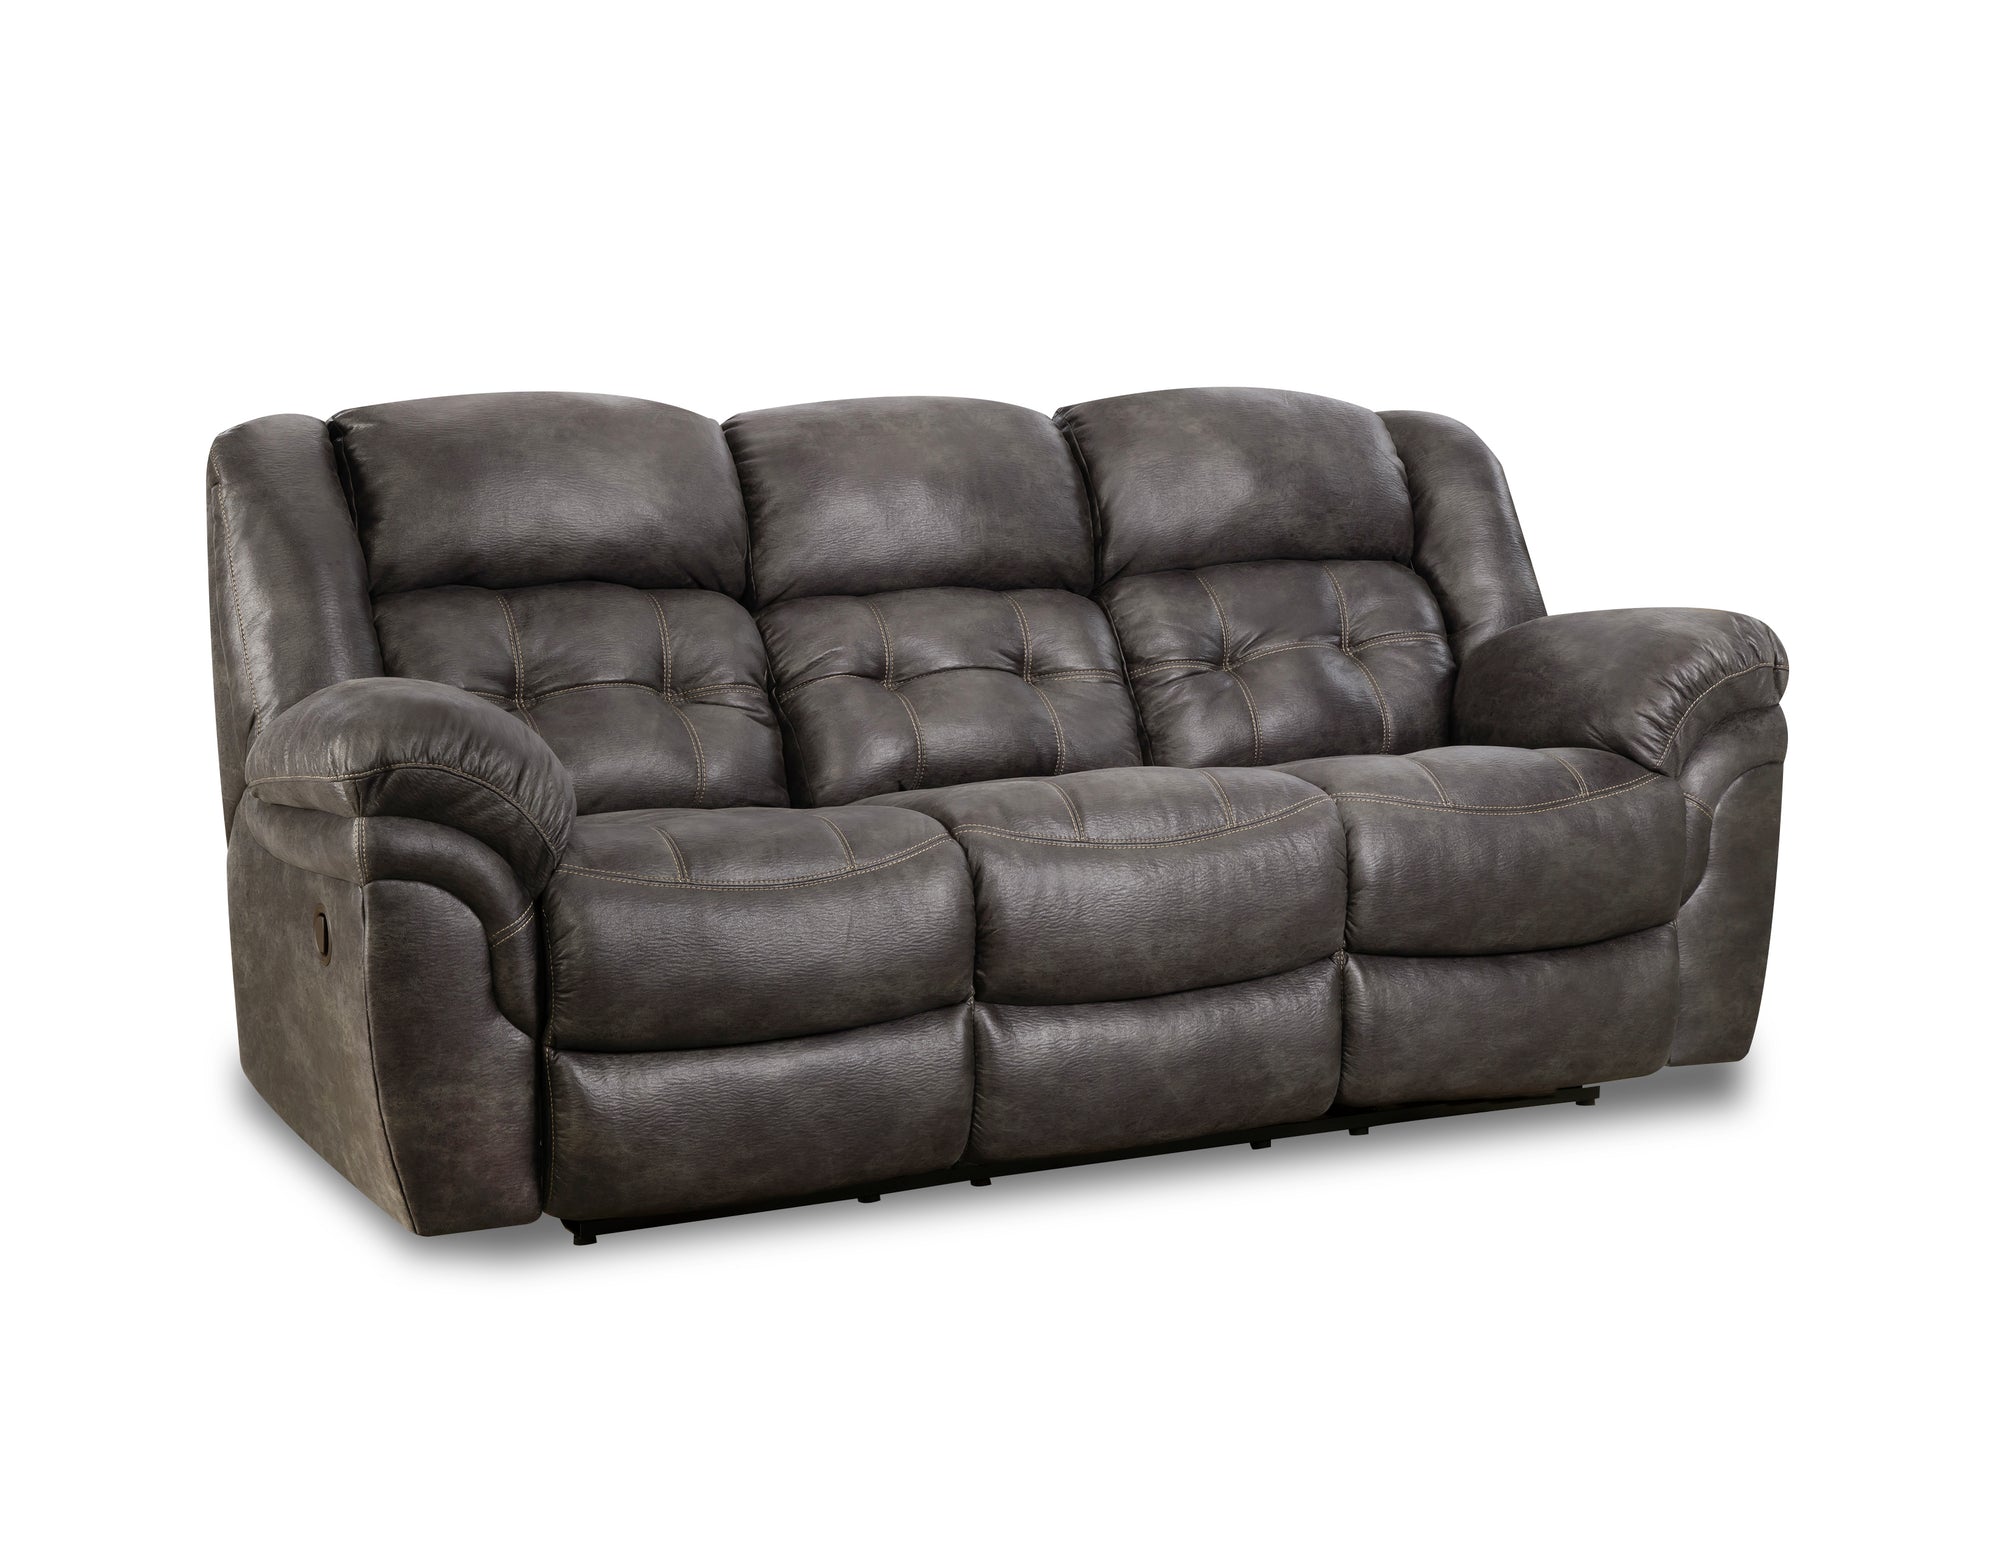 Frontier Power Sofa (129) in Charcoal